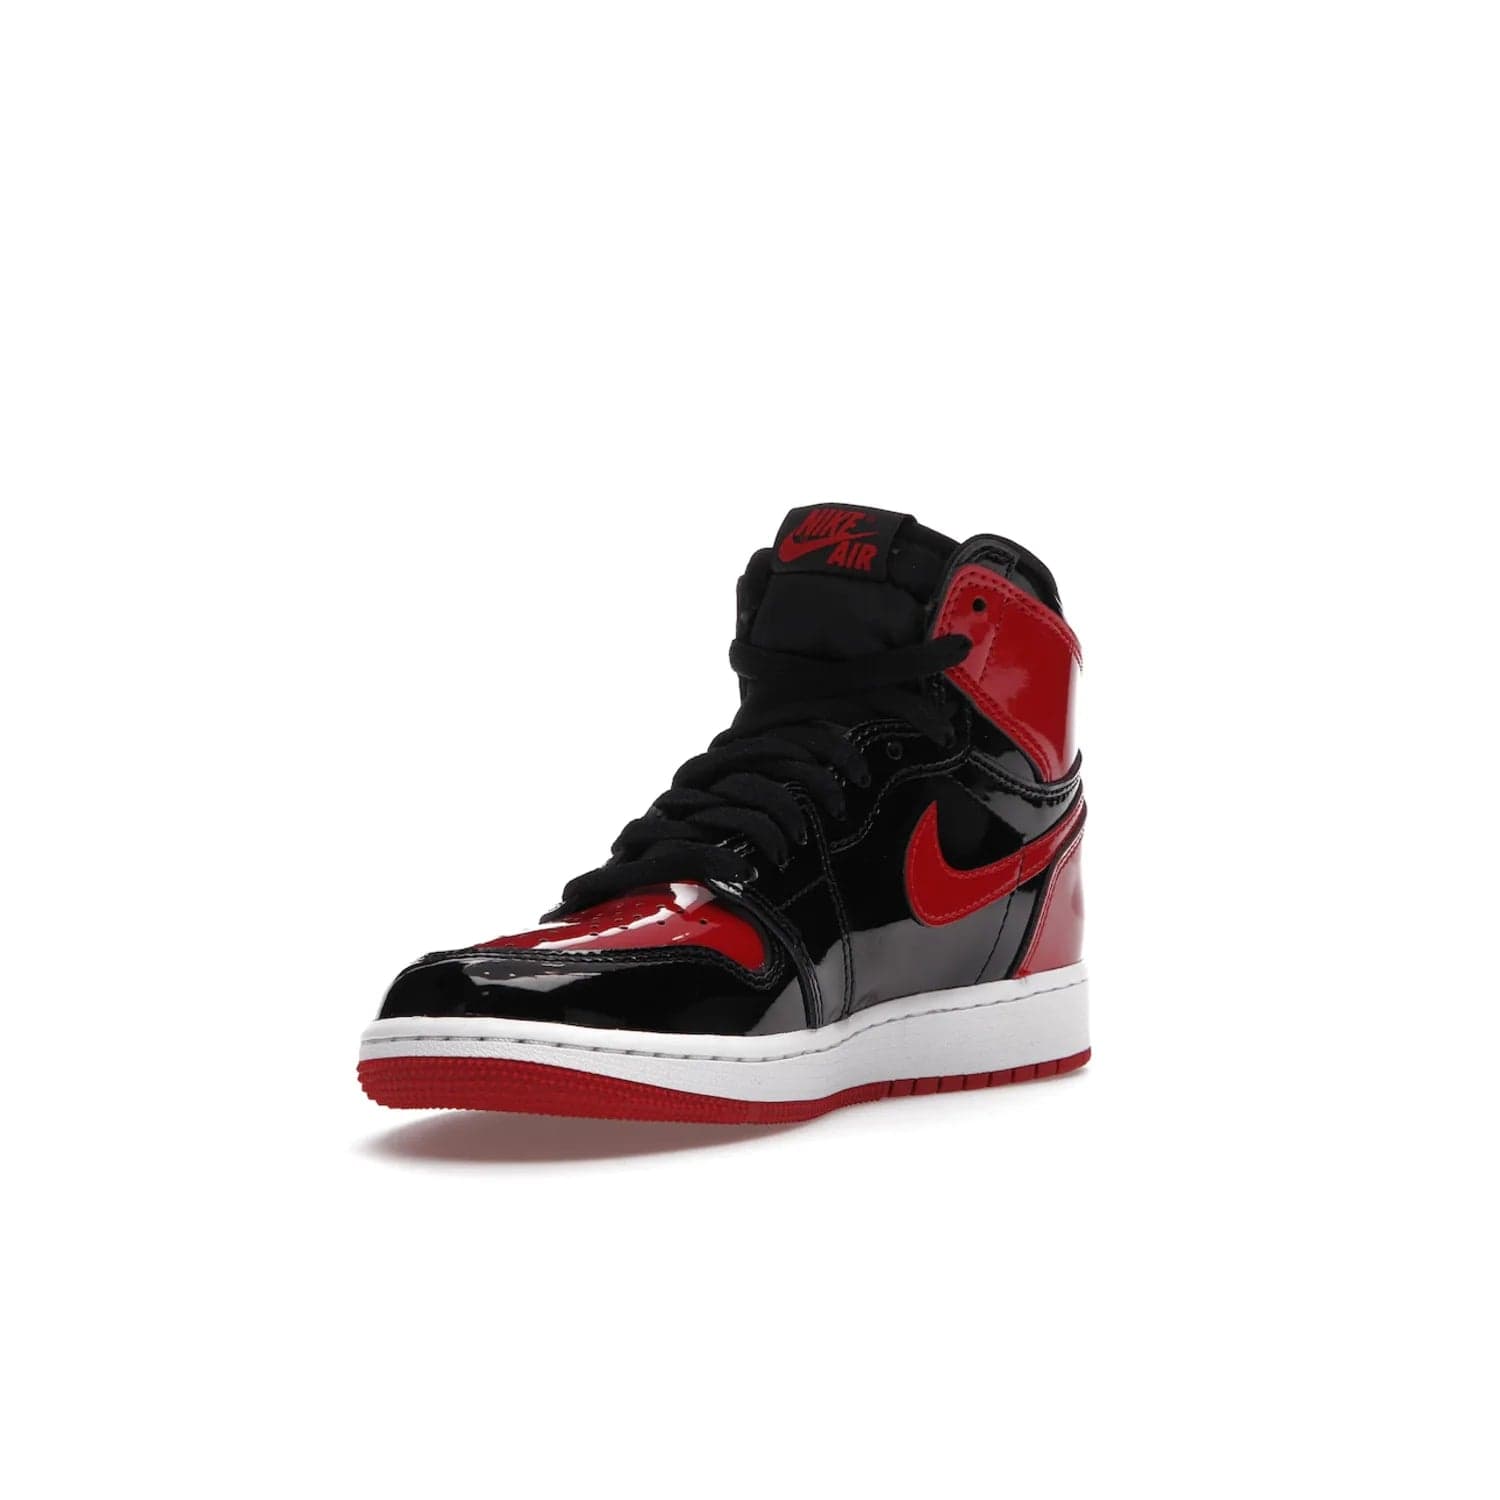 Jordan 1 Retro High OG Patent Bred (GS) - Image 14 - Only at www.BallersClubKickz.com - Upgrade your sneaker game with the iconic Air Jordan 1 Retro High OG Bred Patent GS. Crafted with premium patent leather and basketball-inspired details for a classic look, they also feature an encapsulated Air-sole cushioning and enhanced red rubber outsole. Don't miss this timeless sneaker with a striking black, white, and varsity red colorway, dropping December 2021.